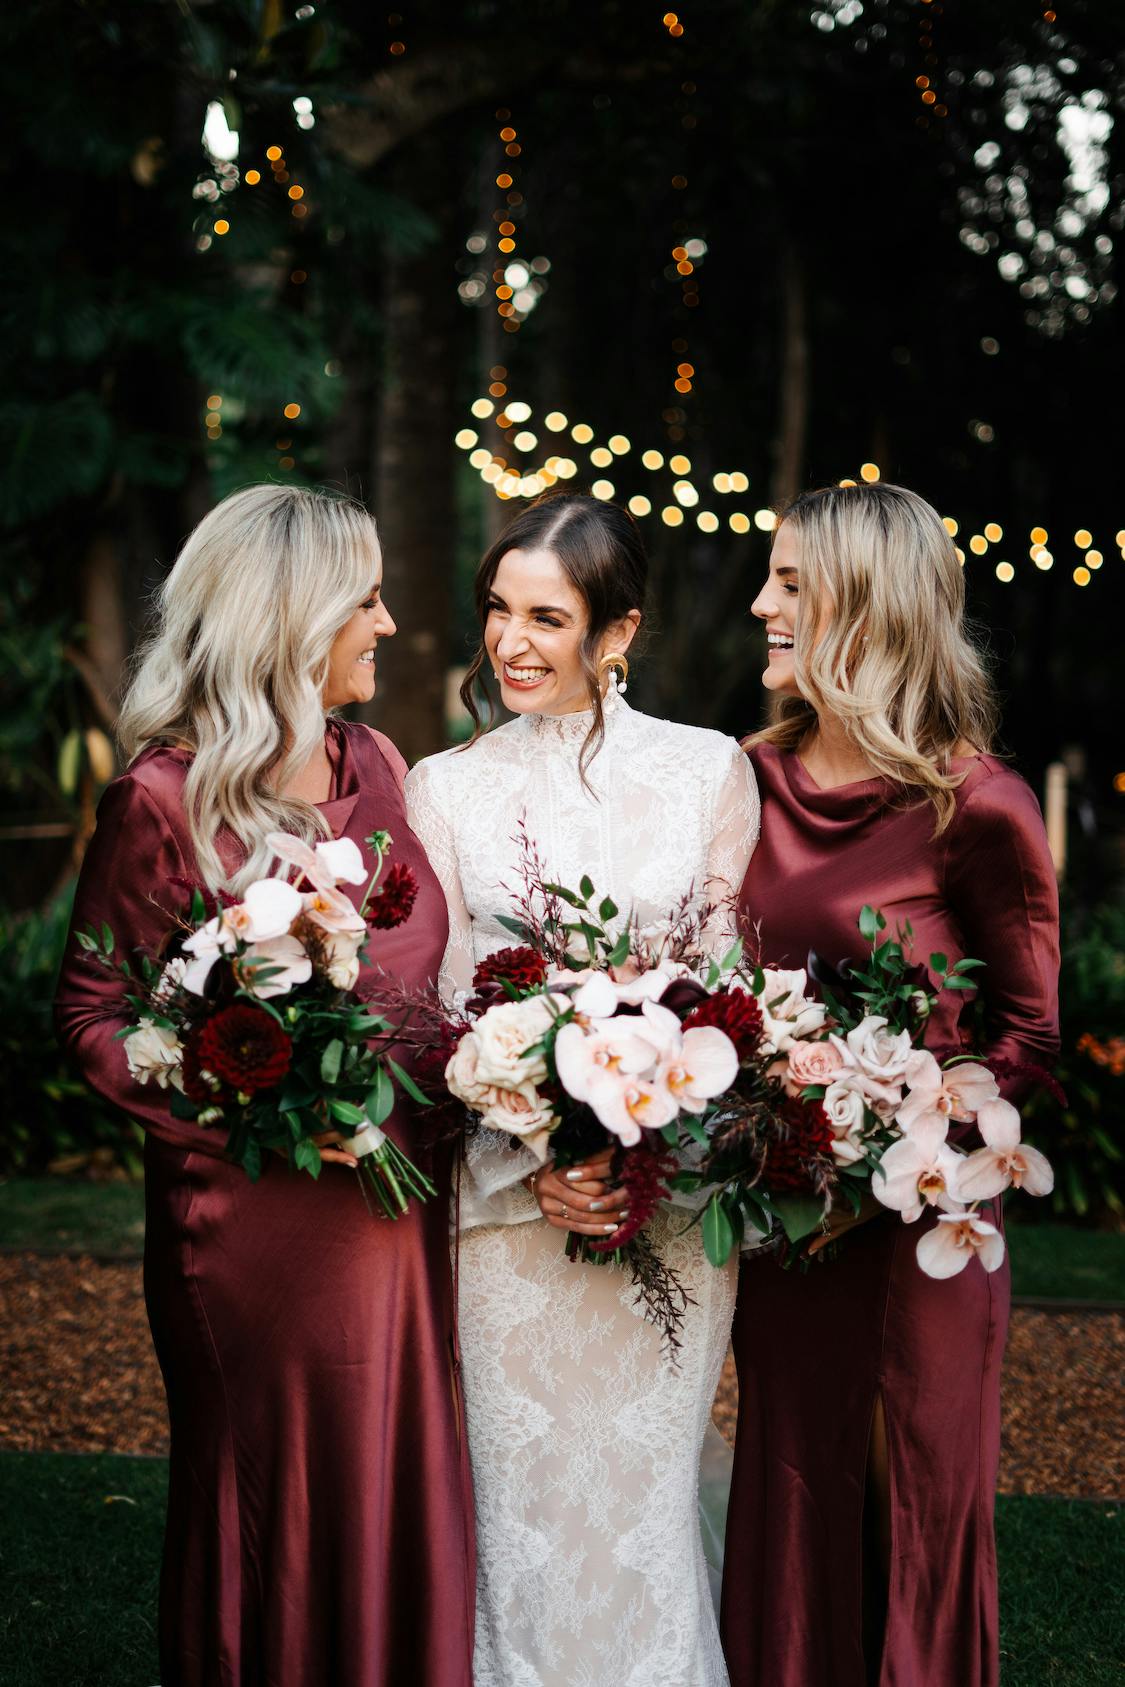 A bride in an elegant white lace dress stands between two bridesmaids in matching burgundy dresses. All three women are smiling joyfully and holding bouquets of flowers, with twinkling string lights and lush greenery in the background.